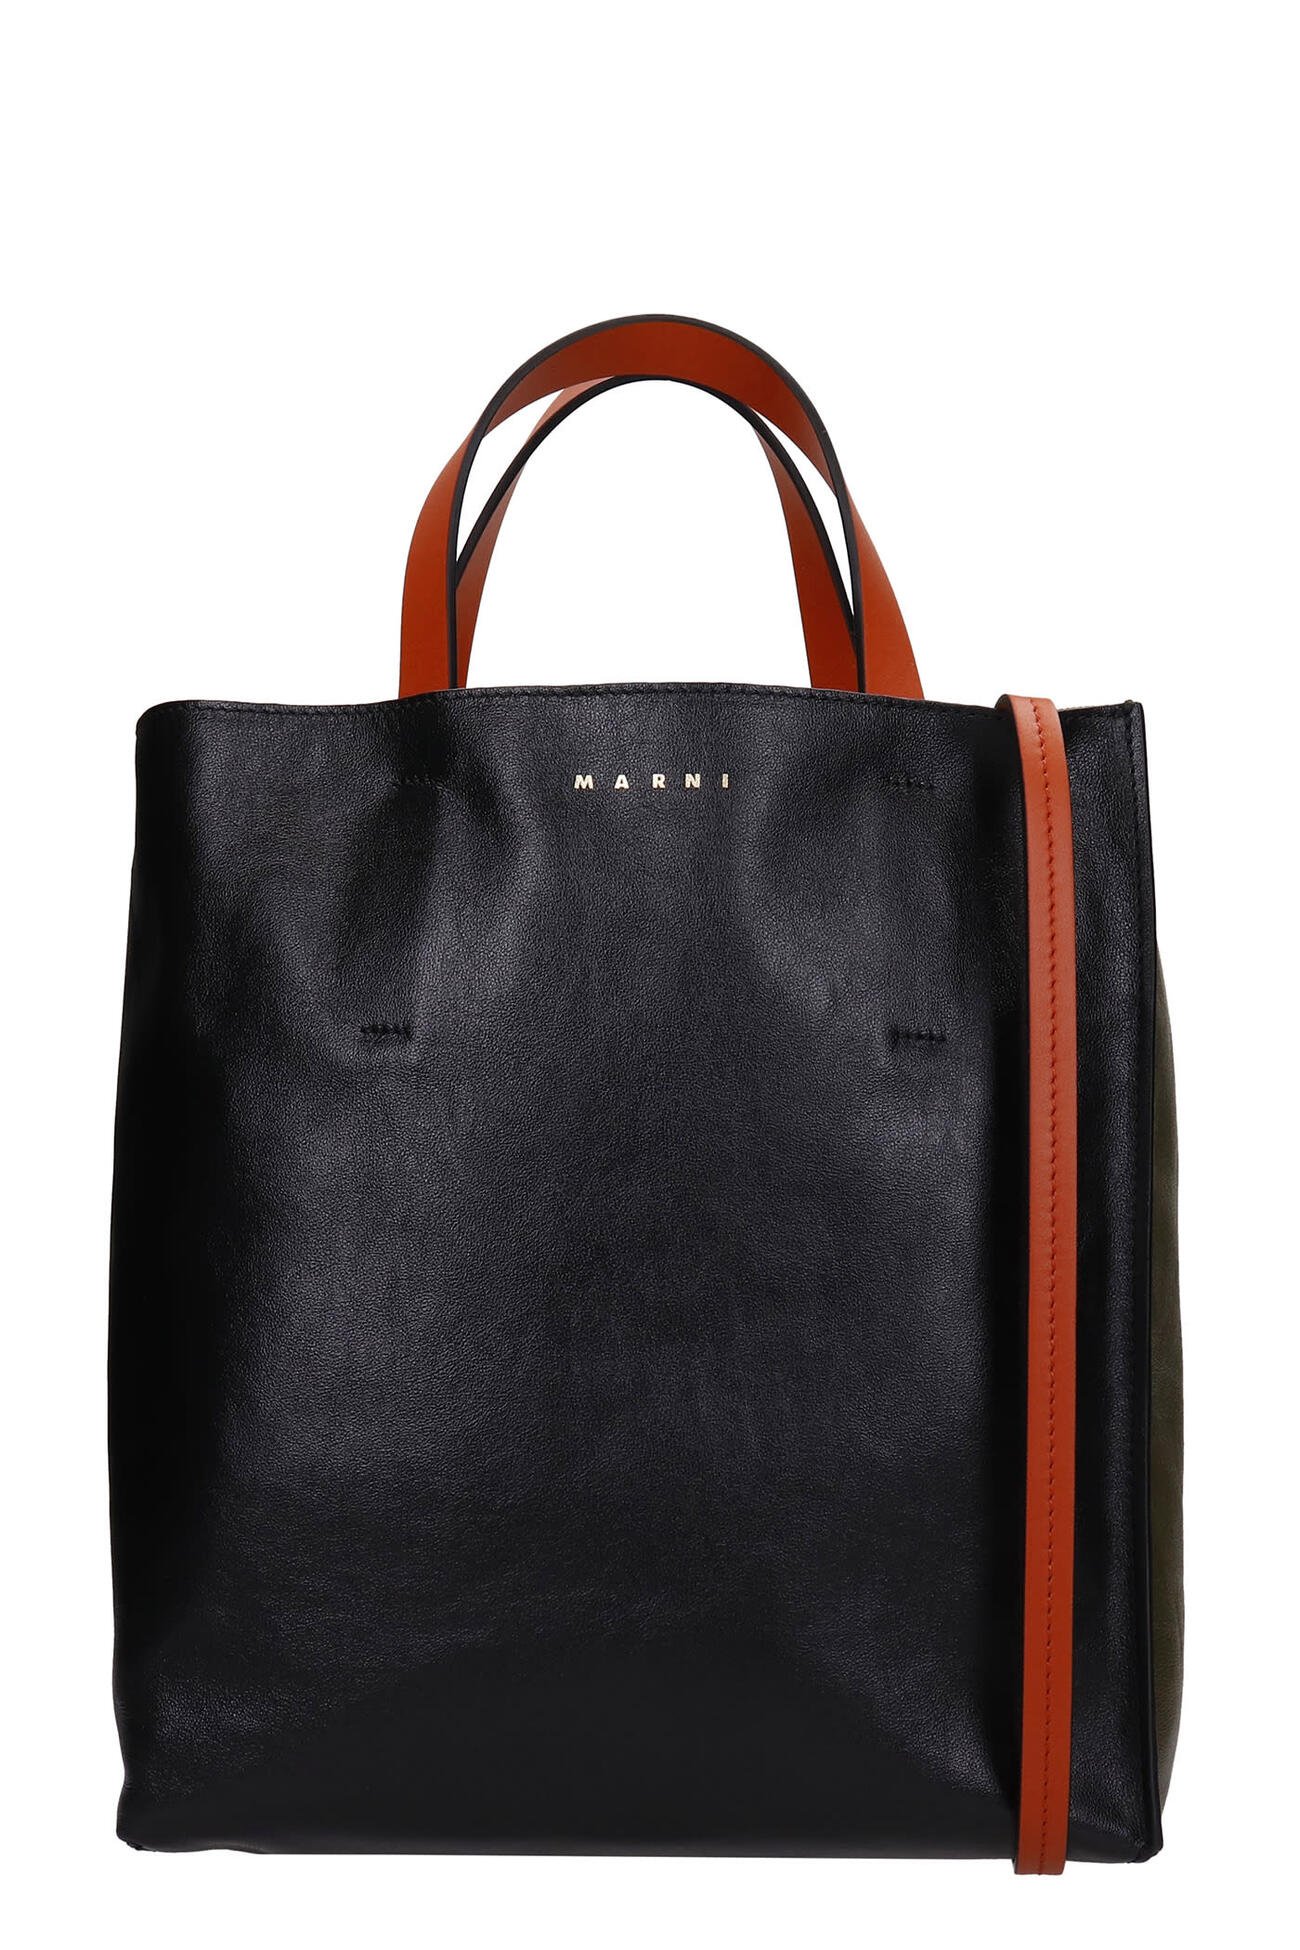 Marni Tote In Leather Color Leather